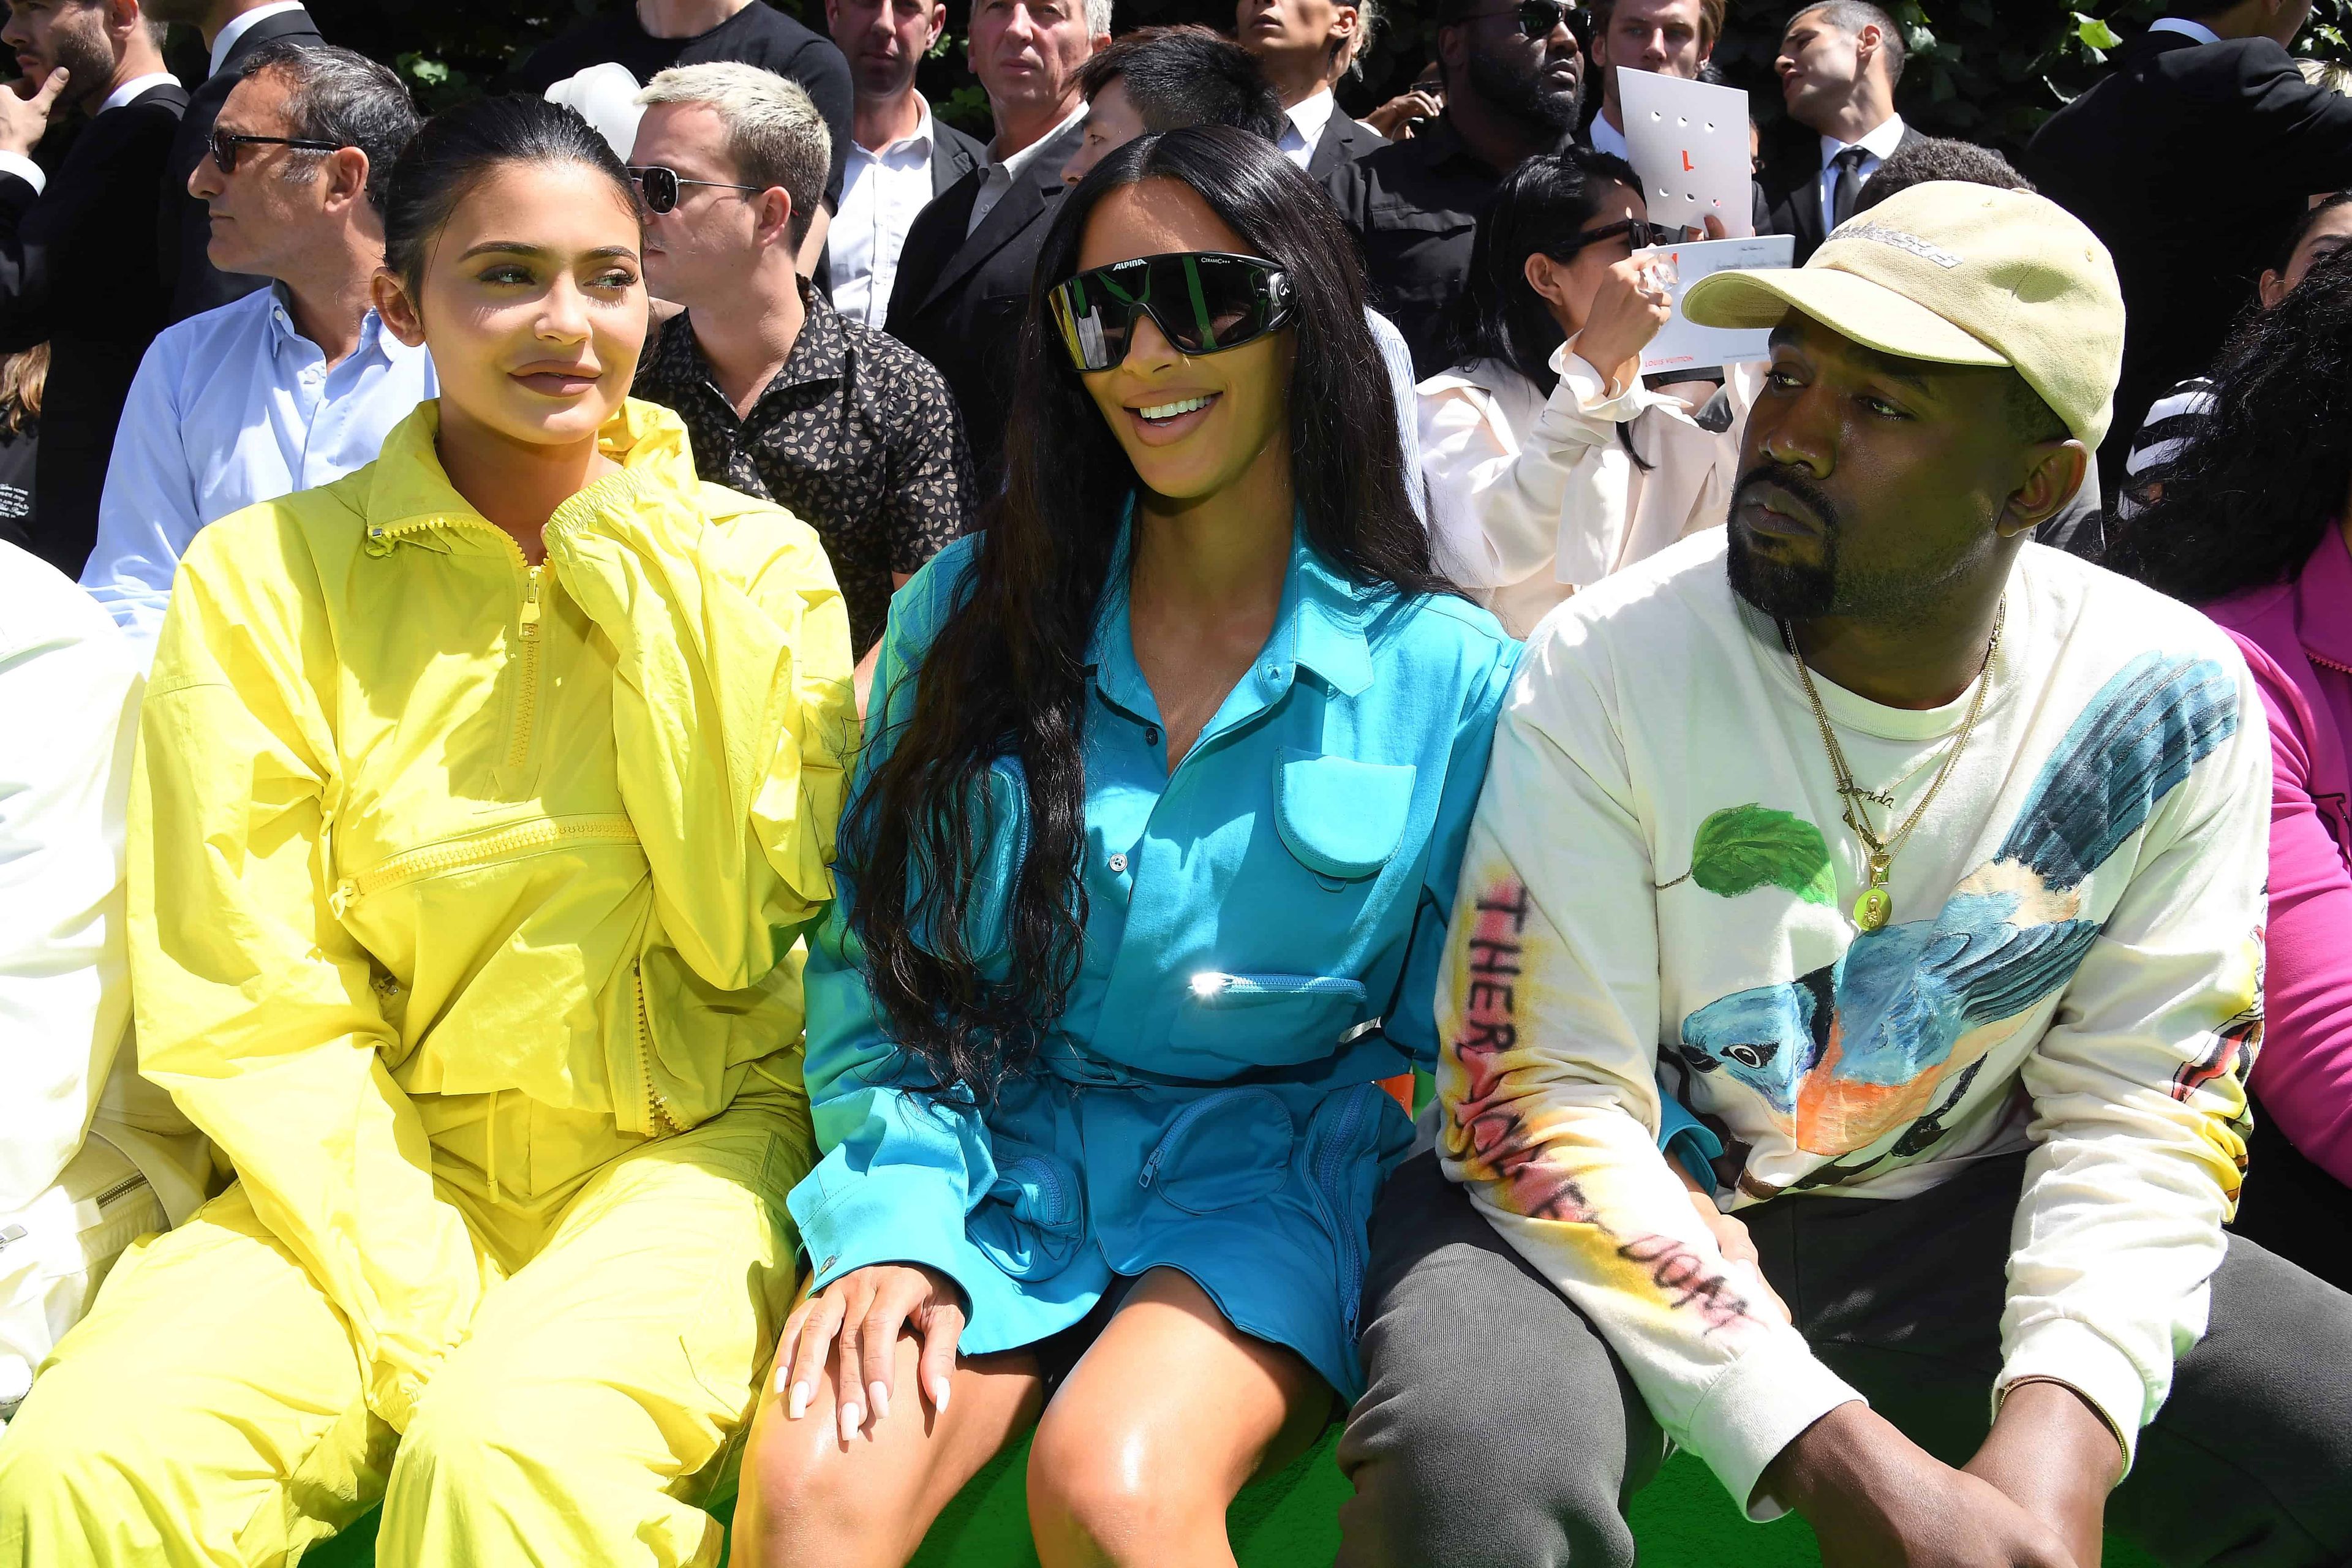 Kanye West Admits To Having A Crush On Kylie Jenner's Best Friend